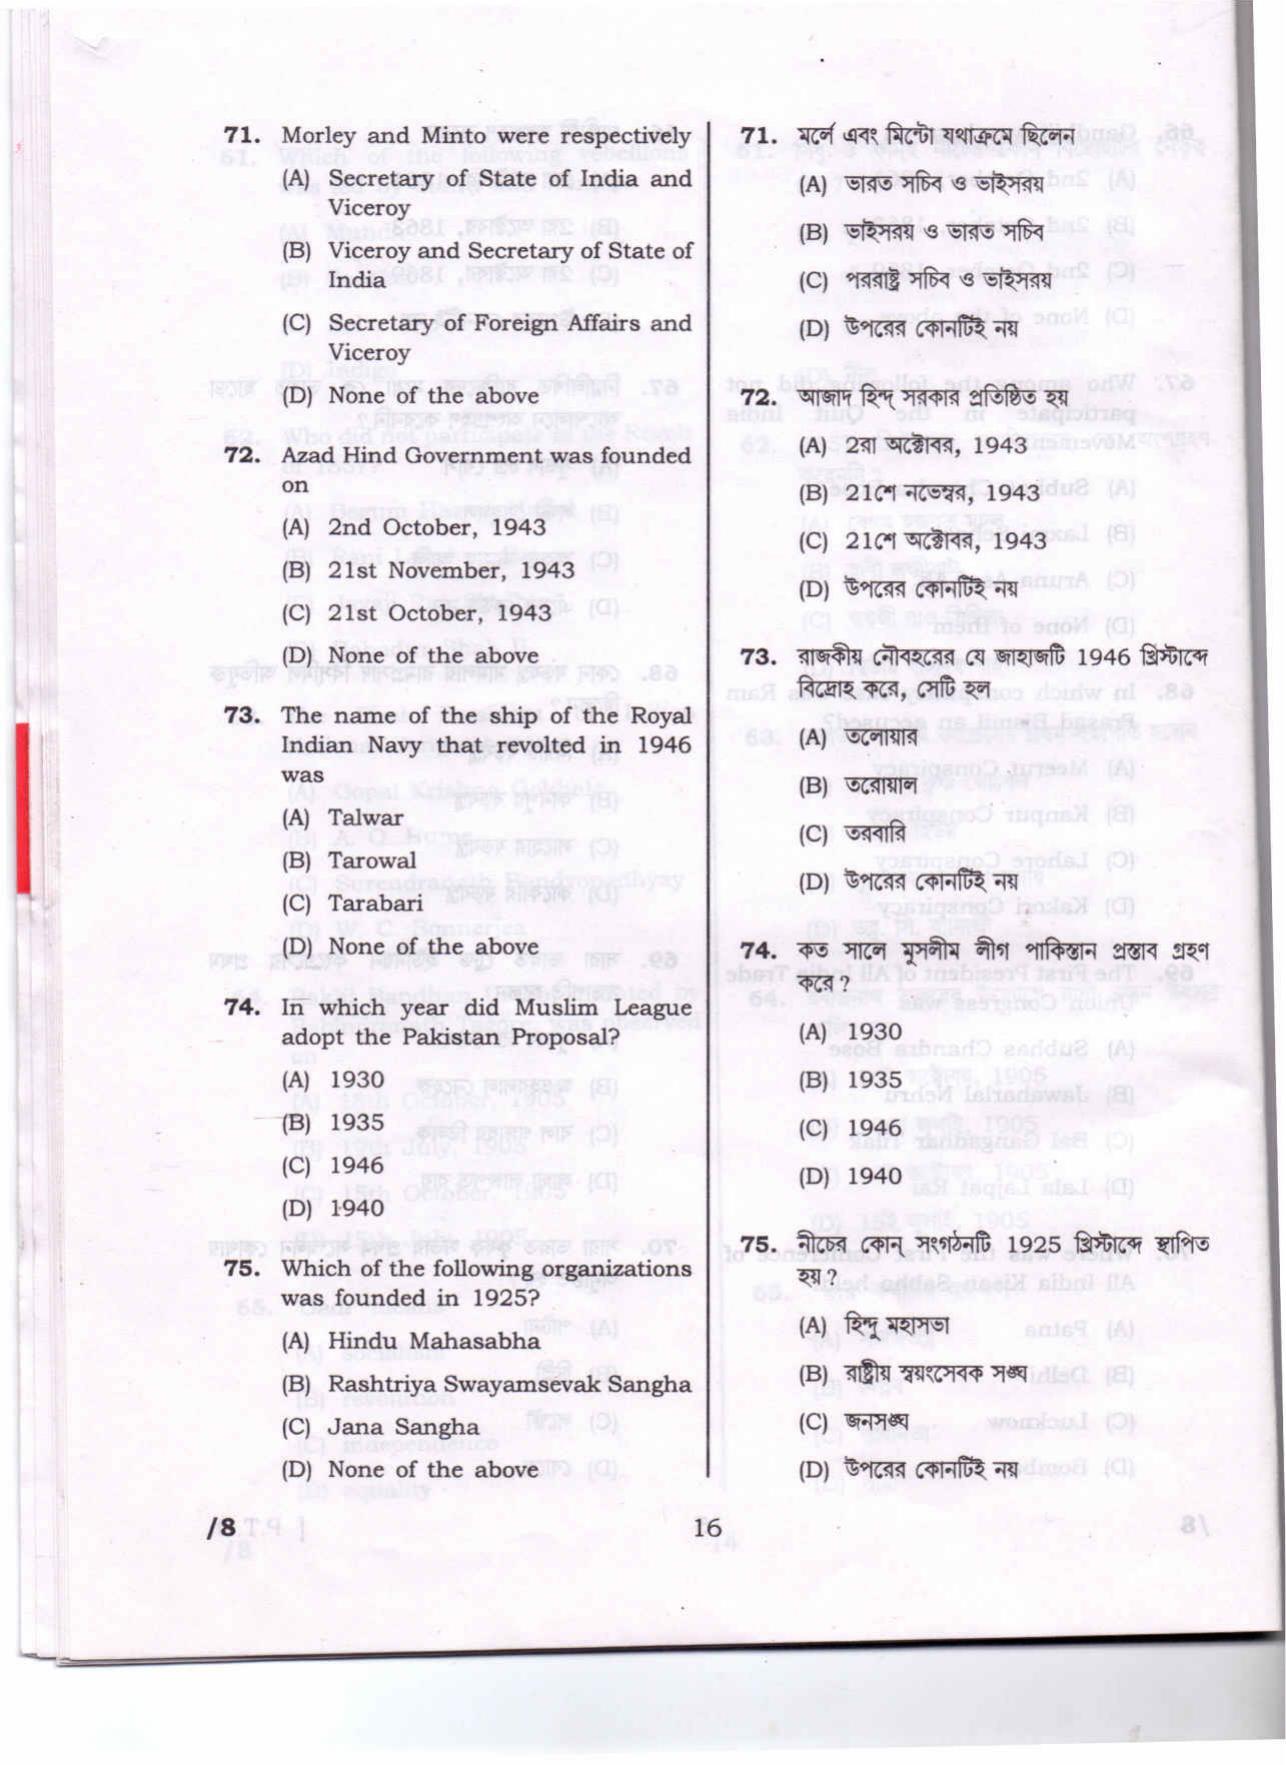 Lala Lajpat Rai University of Veterinary and Animal Sciences Papers - History - Page 28